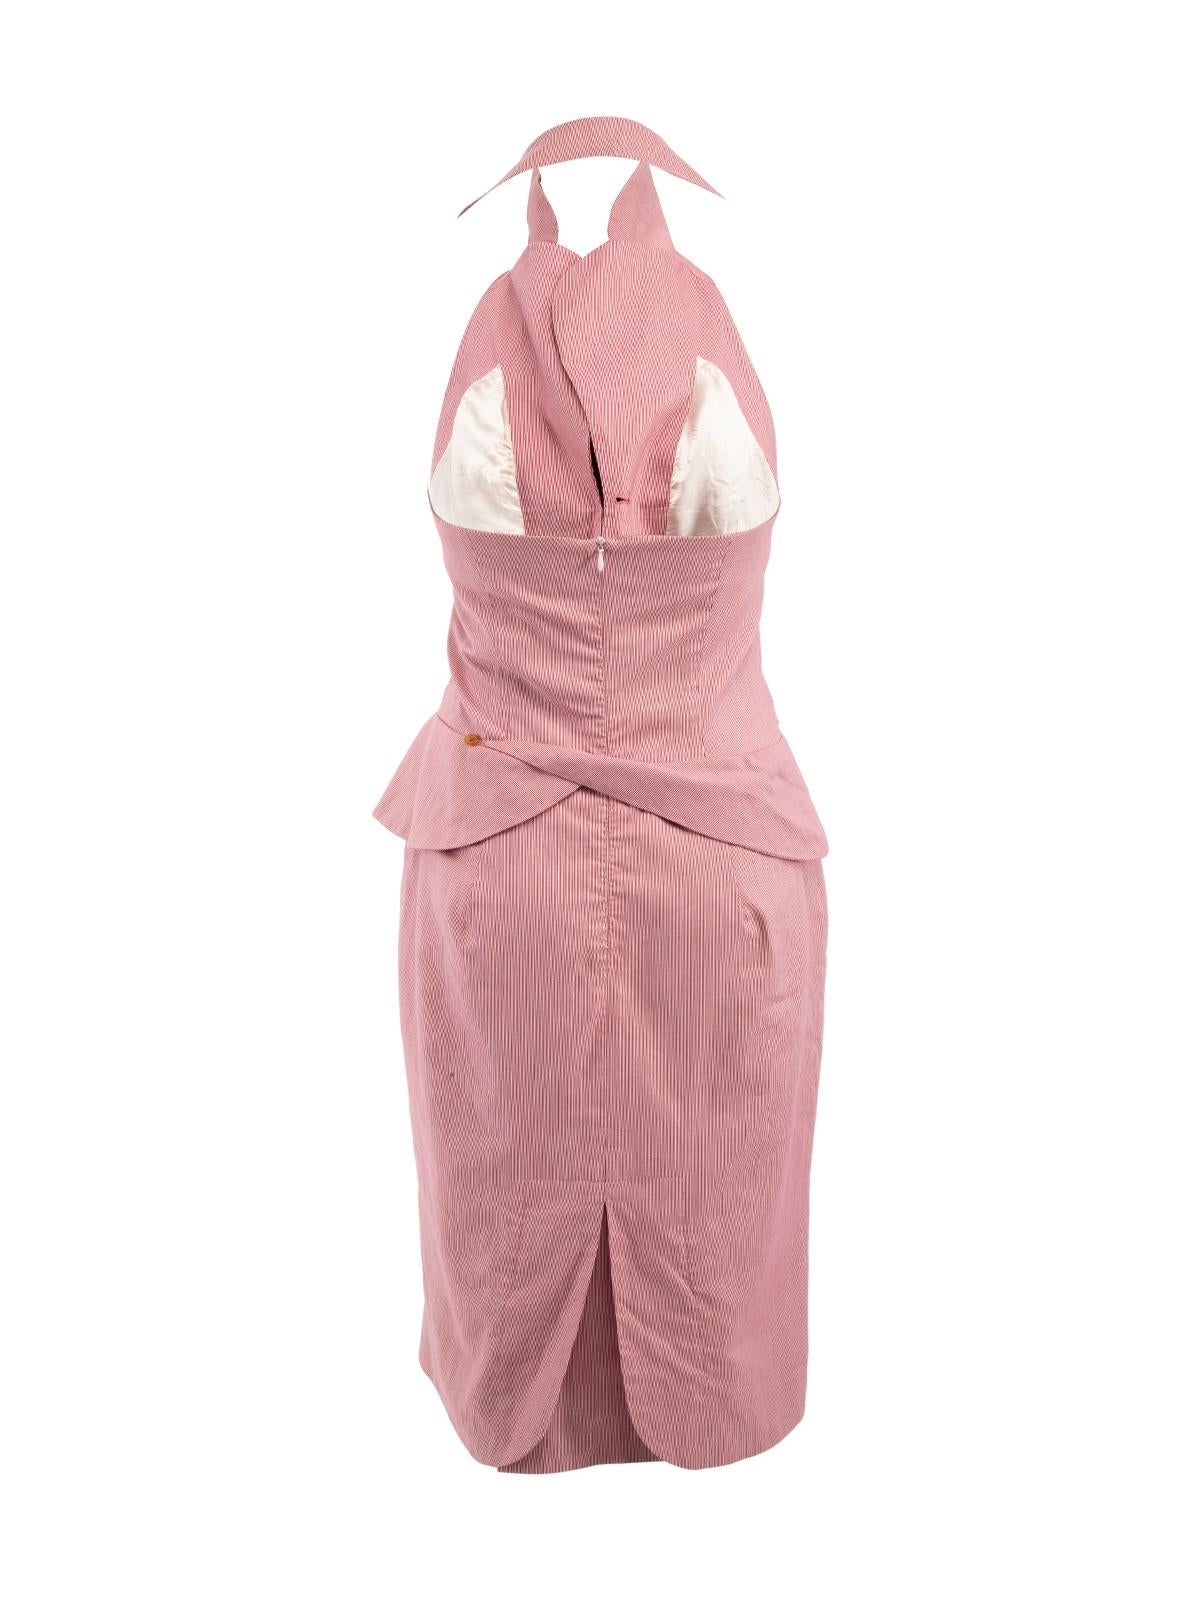 Vivienne Westwood Women's Halter Neck Dress with Pockets In Excellent Condition In London, GB